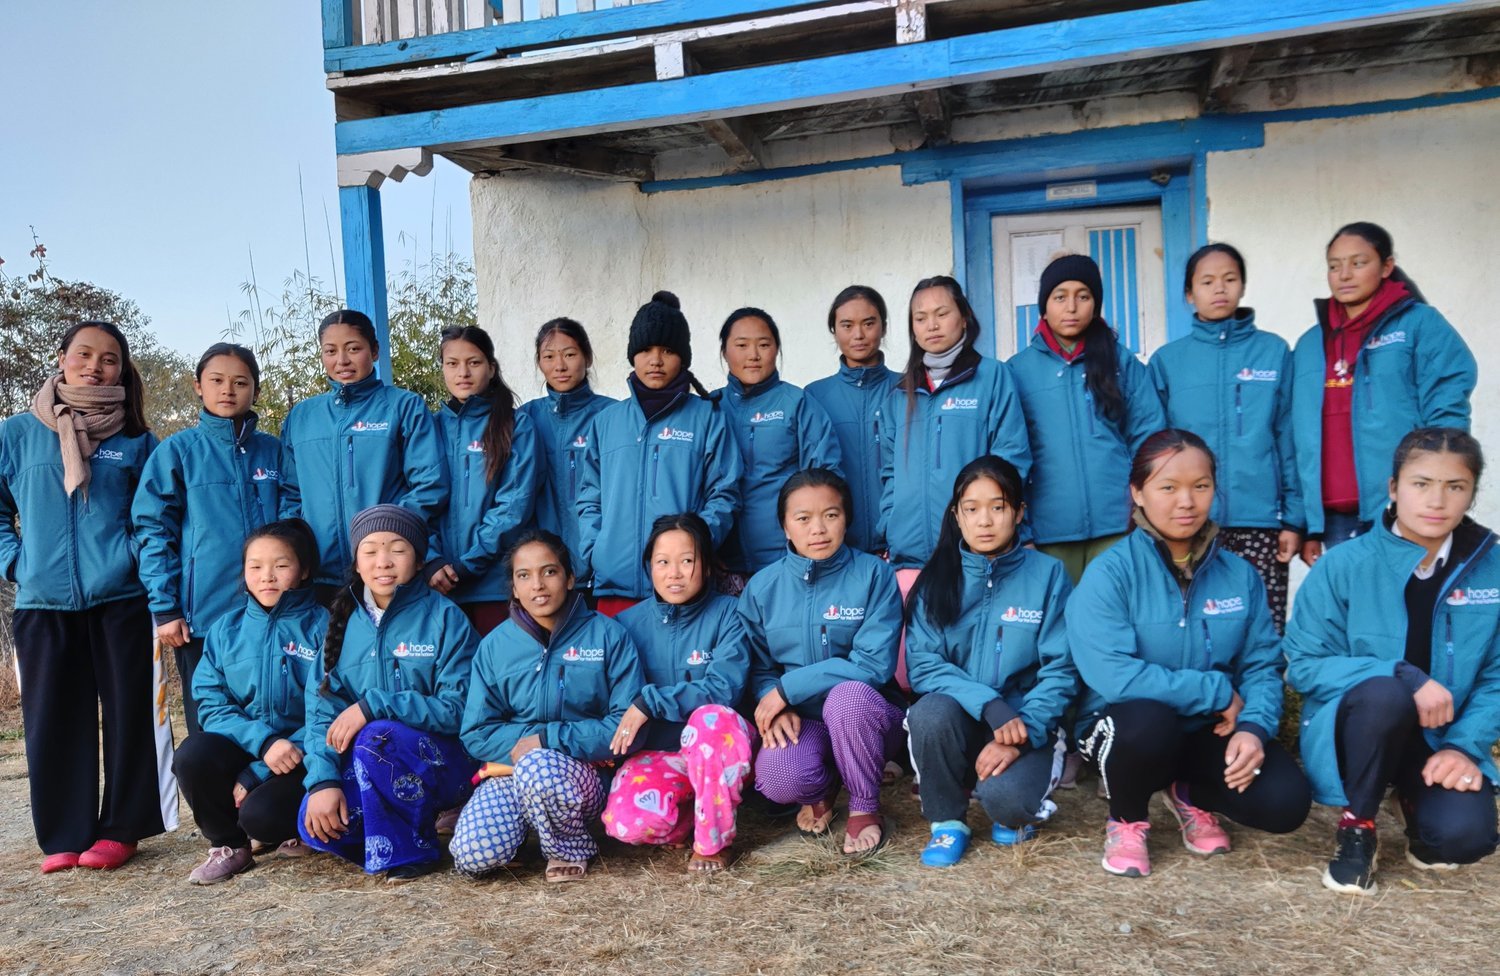 20+new+girls+with+winter+new+jackets+with+hope+for+The+Nation+logo.jpg